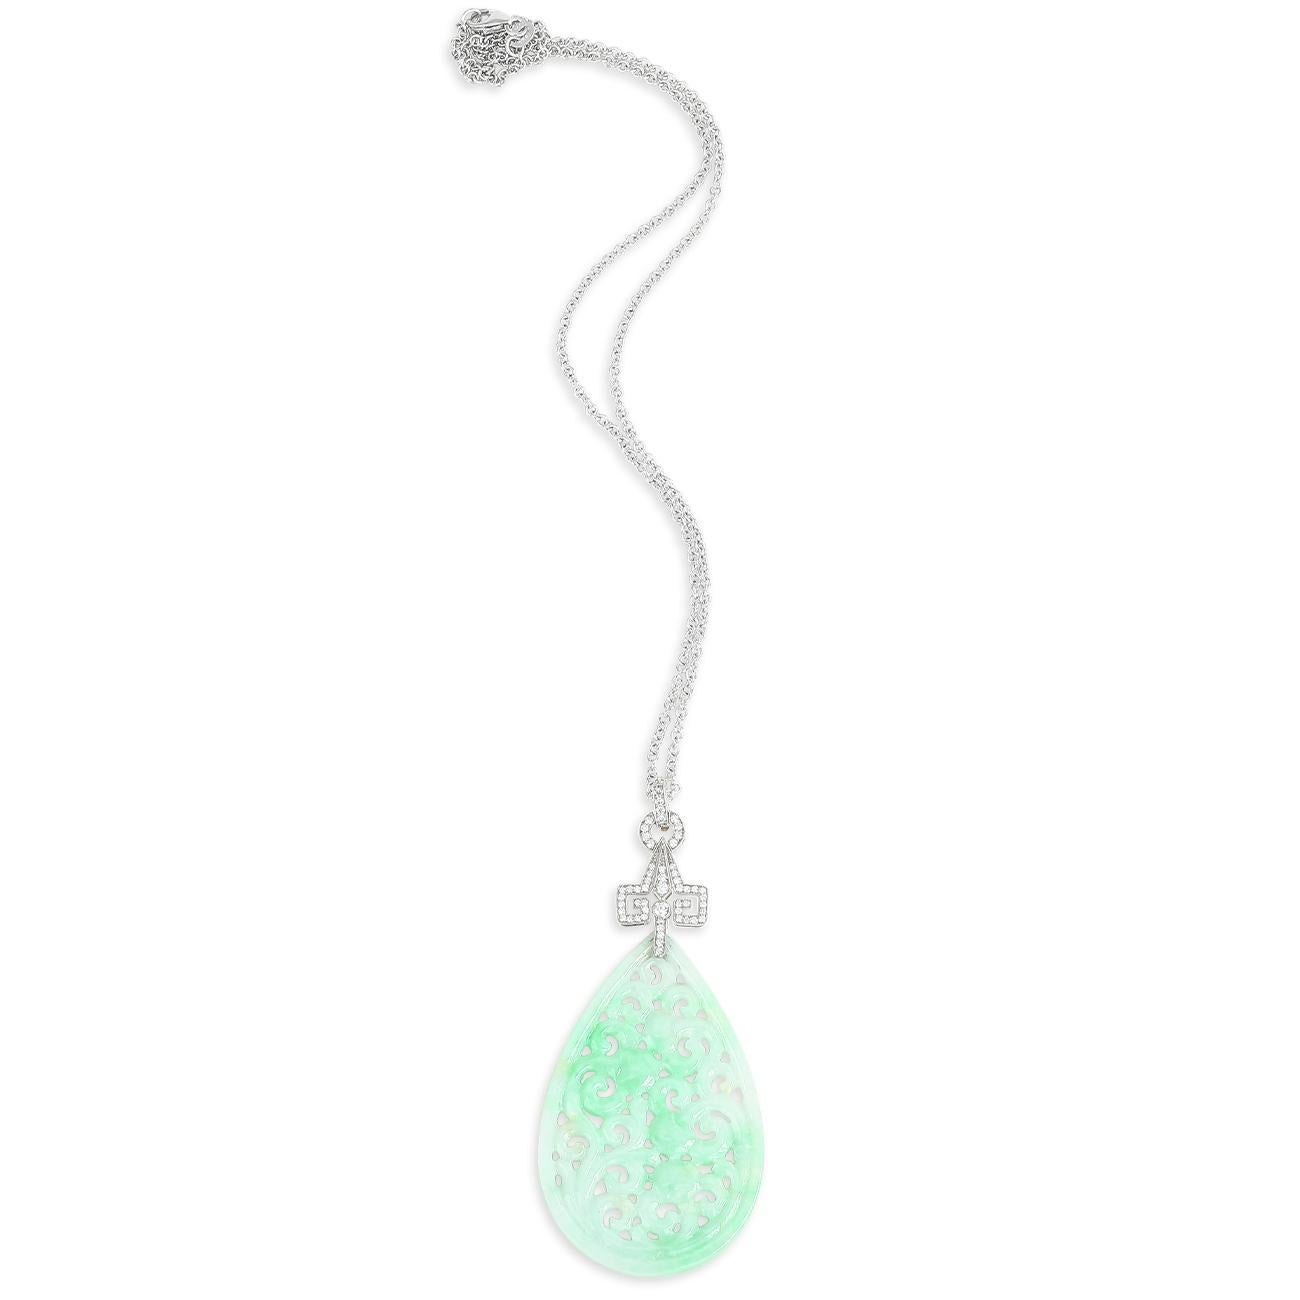 Flowers and vines thrive in this lush Jade pendant. The carved pear-shaped moss in snow jade dangles from a beautifully handcrafted diamond bale set in 18K white gold. Moss in snow is a classic jade pattern cherished for centuries. The deep green